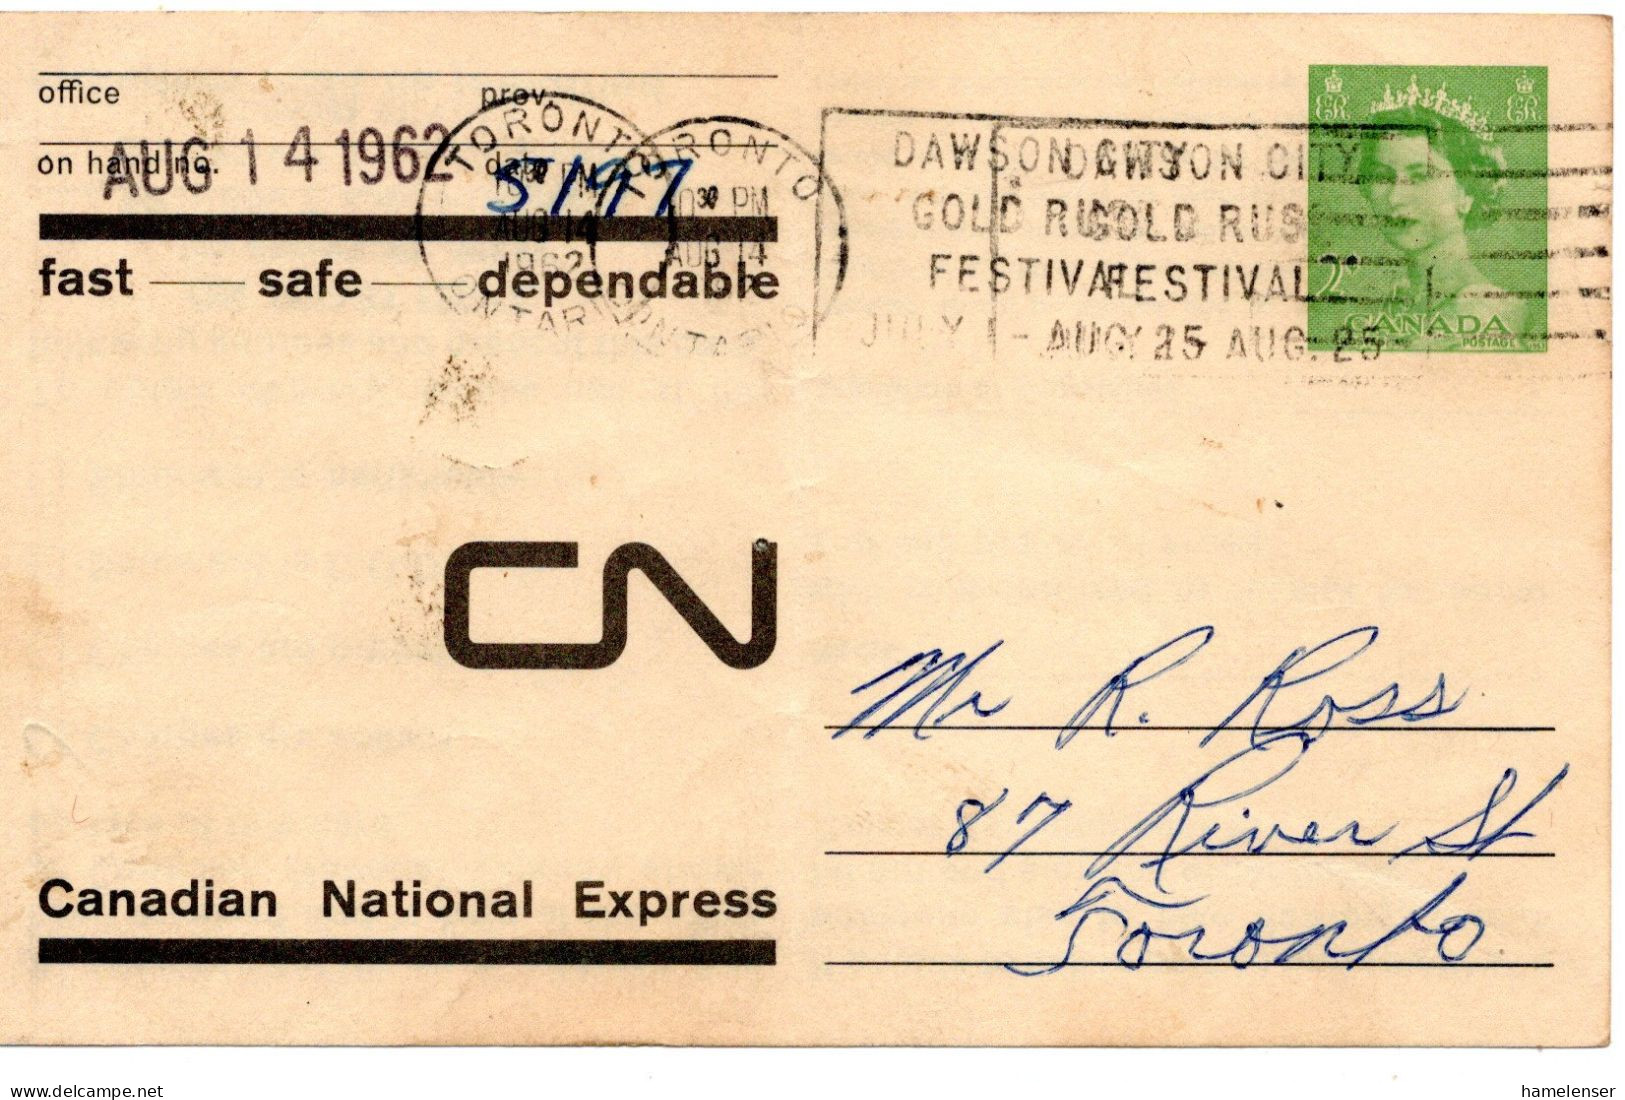 68077 - Canada - 1962 - 2¢ QEII GAKte "Canadian National Express" Als OrtsKte TORONTO - ..., Senkr Bug - Covers & Documents